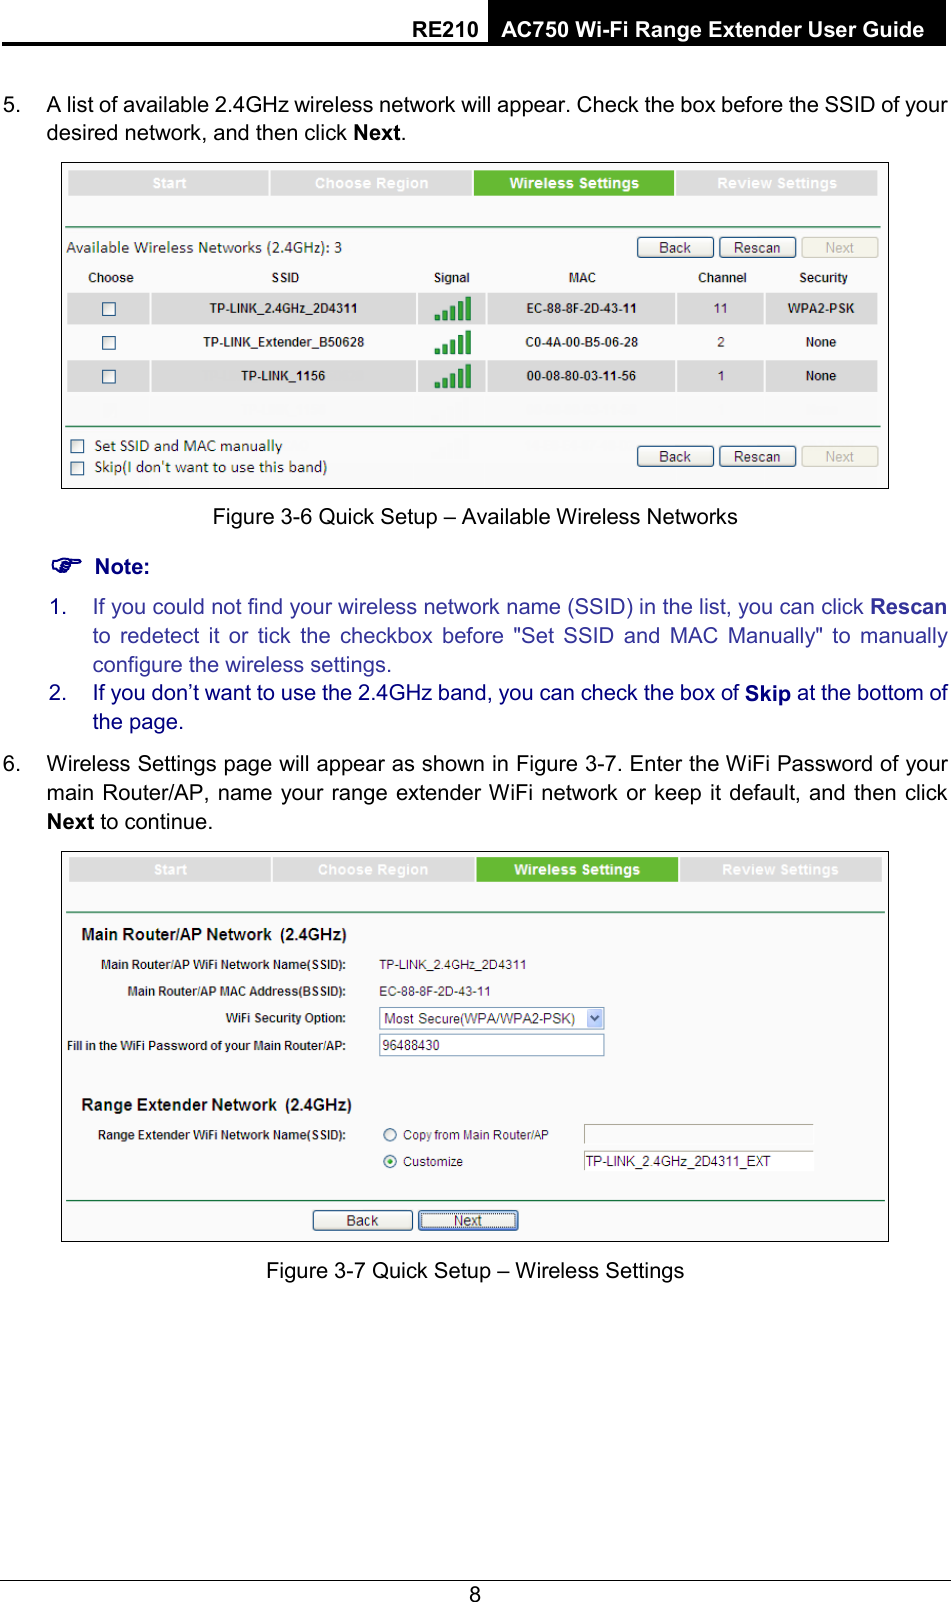 RE210 AC750 Wi-Fi Range Extender User Guide  5. A list of available 2.4GHz wireless network will appear. Check the box before the SSID of your desired network, and then click Next.    Figure 3-6 Quick Setup – Available Wireless Networks  Note: 1. If you could not find your wireless network name (SSID) in the list, you can click Rescan to redetect it or tick the checkbox before &quot;Set SSID and MAC Manually&quot; to manually configure the wireless settings. 2. If you don’t want to use the 2.4GHz band, you can check the box of Skip at the bottom of the page. 6. Wireless Settings page will appear as shown in Figure 3-7. Enter the WiFi Password of your main Router/AP, name your range extender WiFi network or keep it default, and then click Next to continue.  Figure 3-7 Quick Setup – Wireless Settings 8 